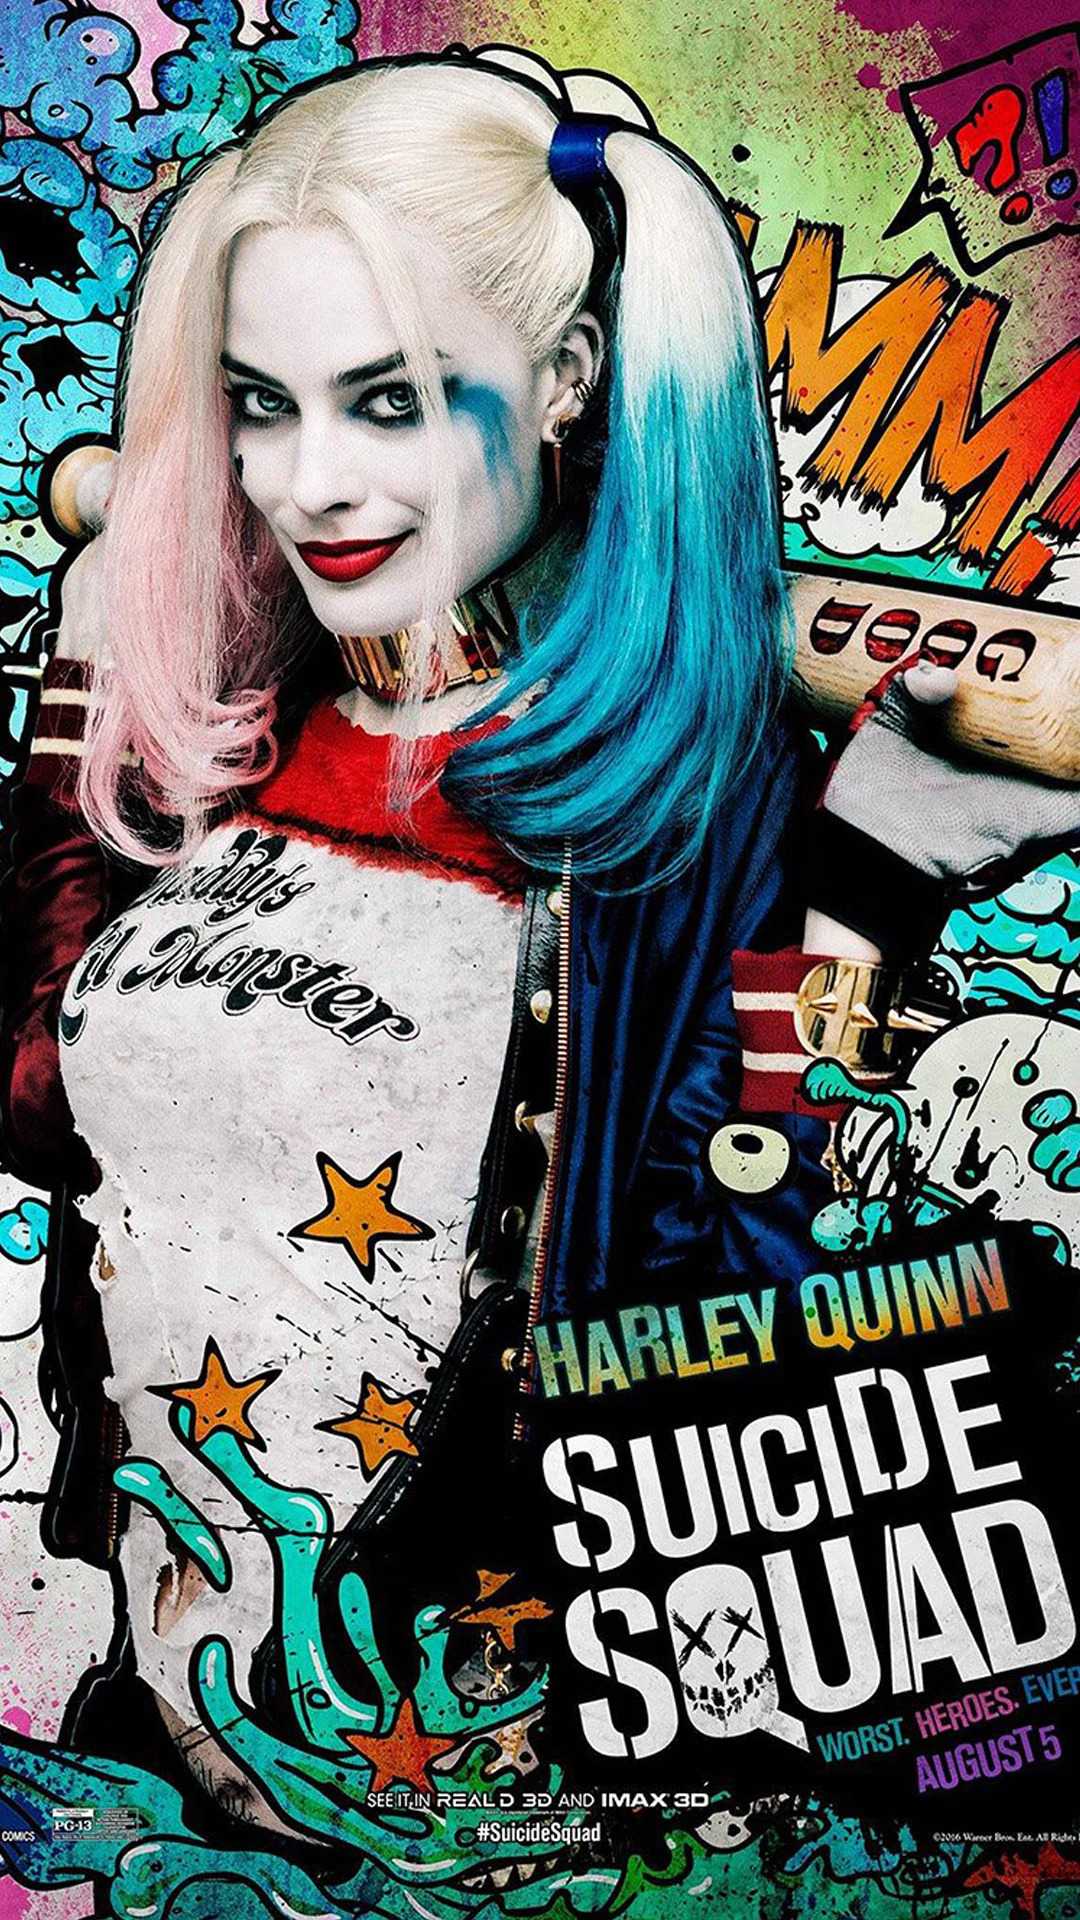 Harley Quinn Suicide Squad Wallpaper 1